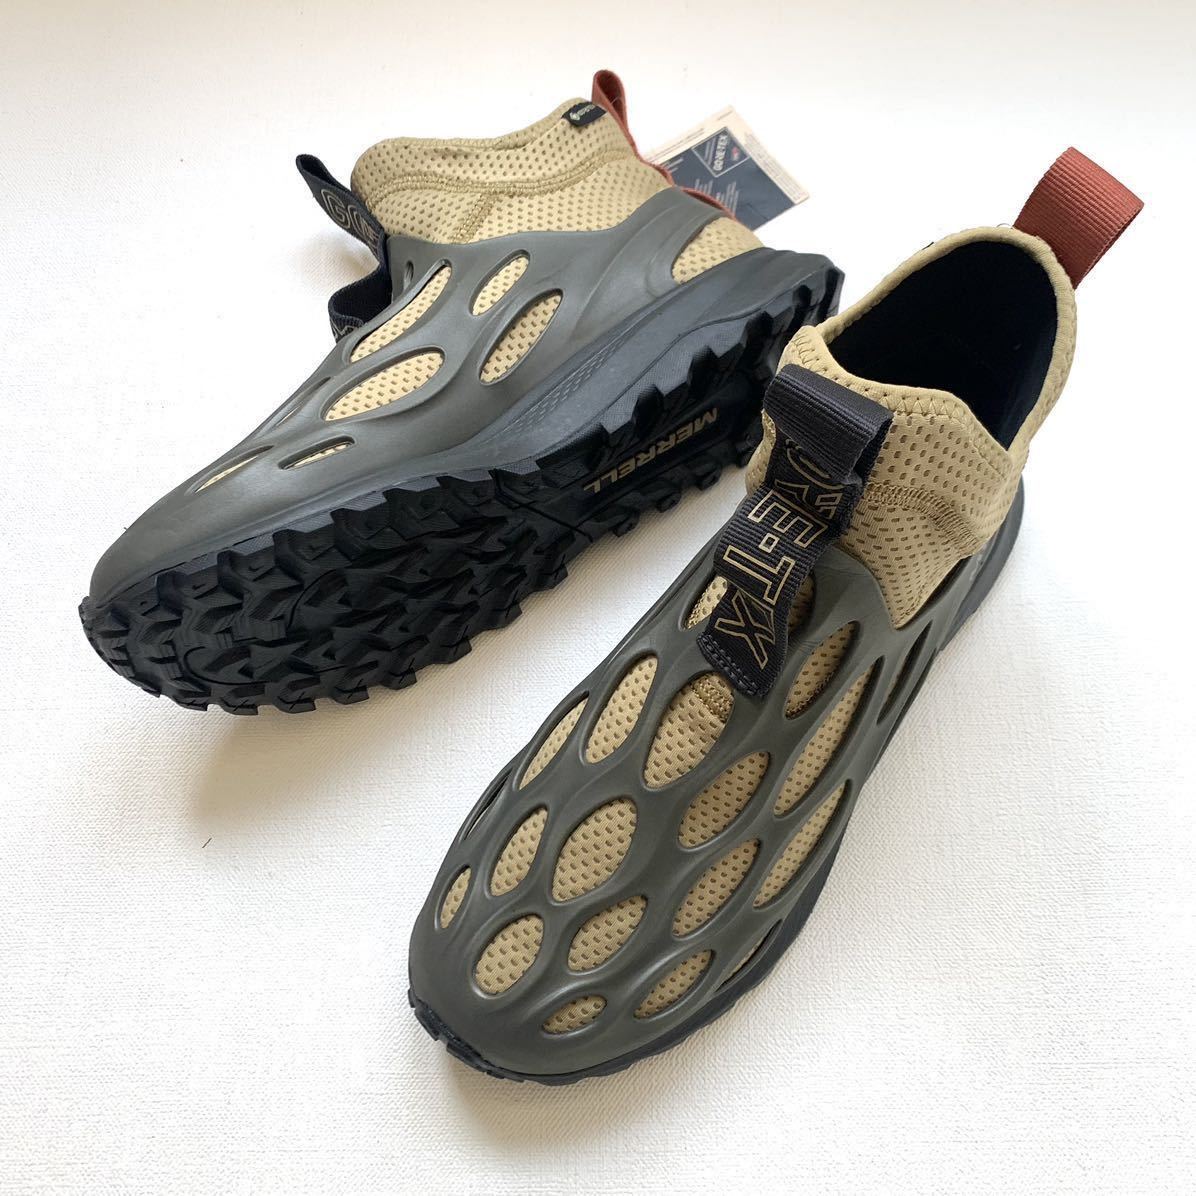  new goods mereruMERRELL 1TRL HYDRO RUNNER MID GTX hydro Runner mid Gore-Tex outdoor shoes 27.5. Japan not yet arrival free shipping 